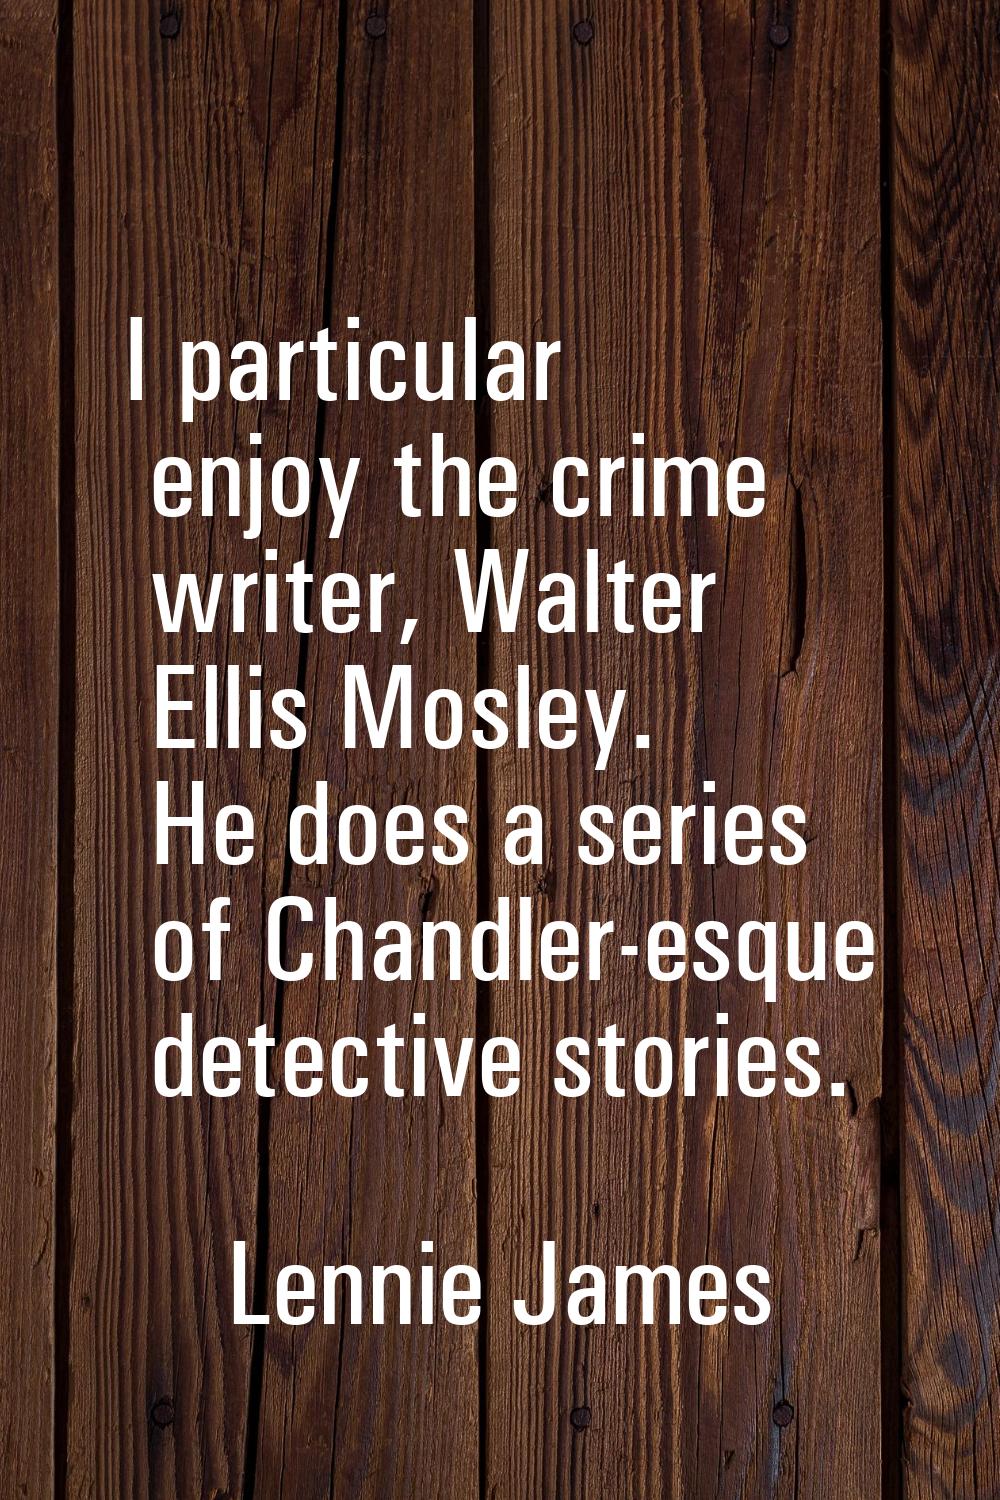 I particular enjoy the crime writer, Walter Ellis Mosley. He does a series of Chandler-esque detect